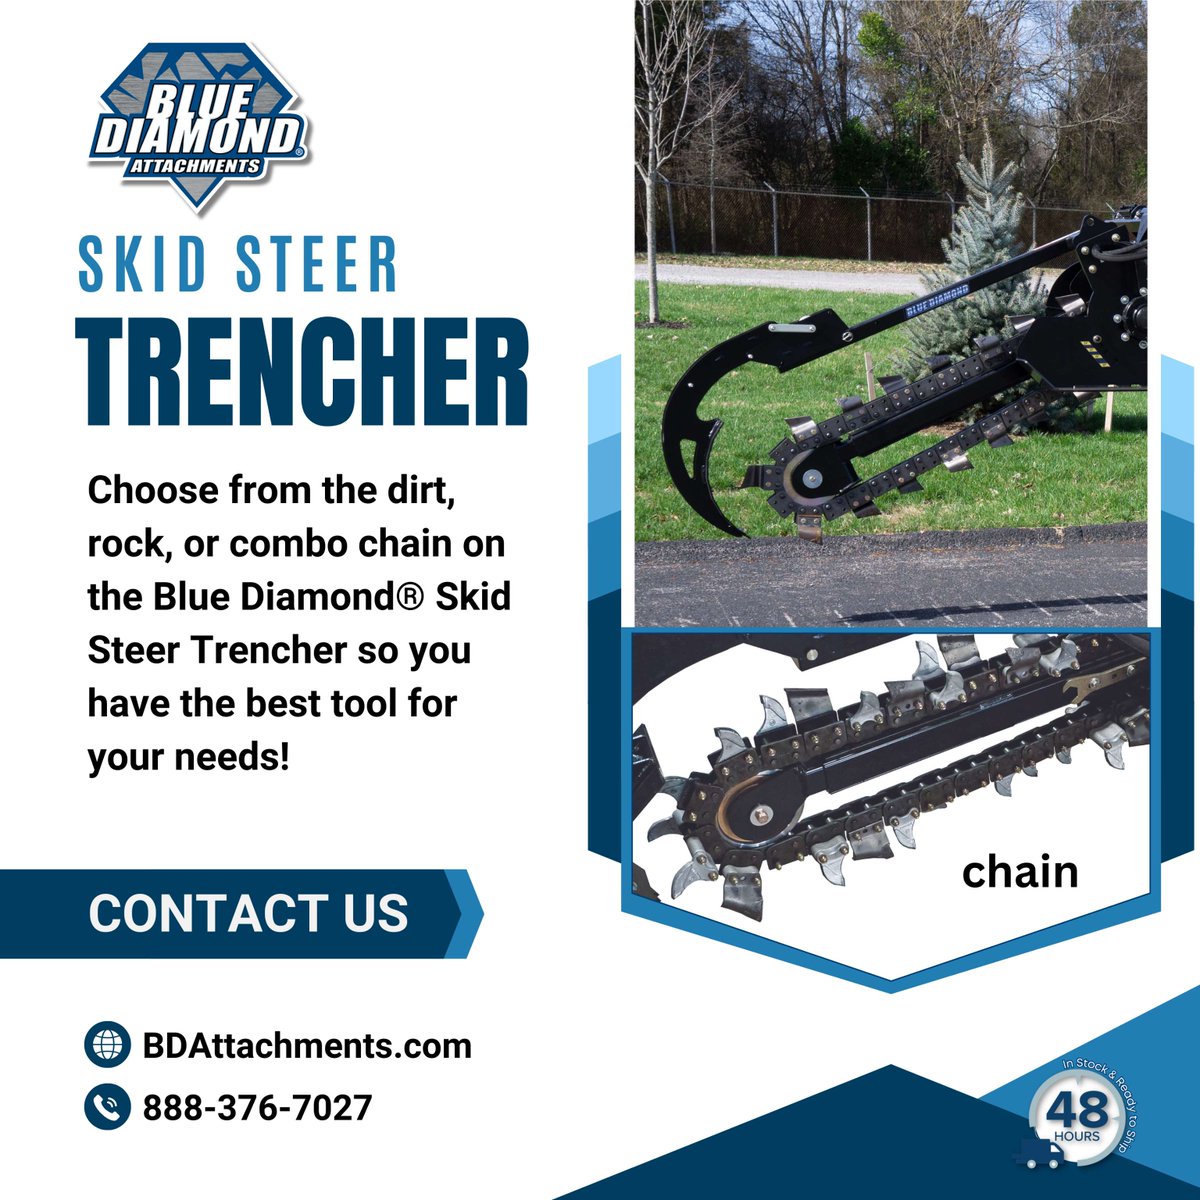 Choose from the dirt, rock, or combo chain on the Blue Diamond® Skid Steer Trencher so you have the best tool for your needs! #BlueDiamondSkidSteer #TrencherAuger #ExcavationTools #ConstructionEquipment

Click bluediamondattachments.com/find-my-dealer to find a dealer near you!